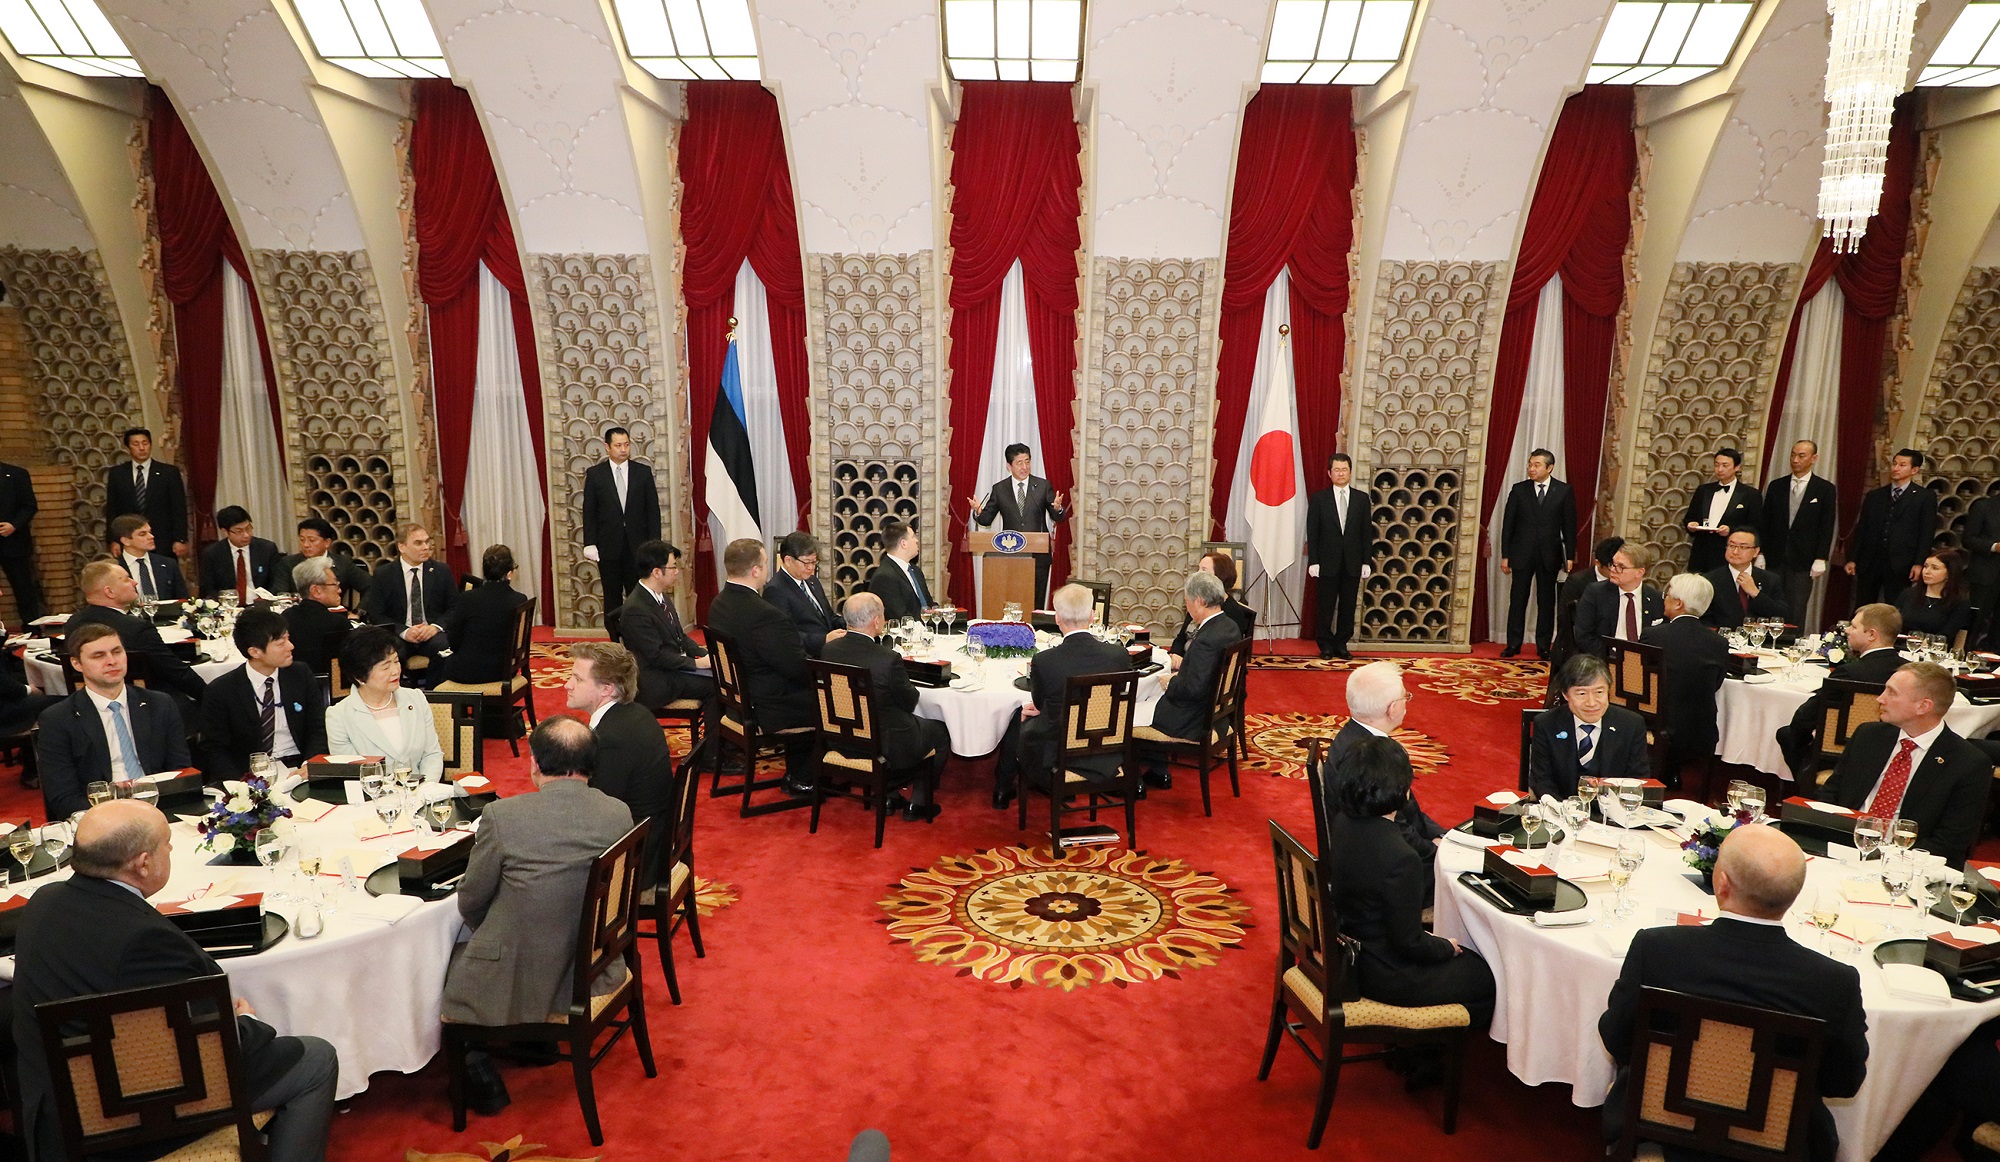 Photograph of the Prime Minister delivering an address at the banquet (6)